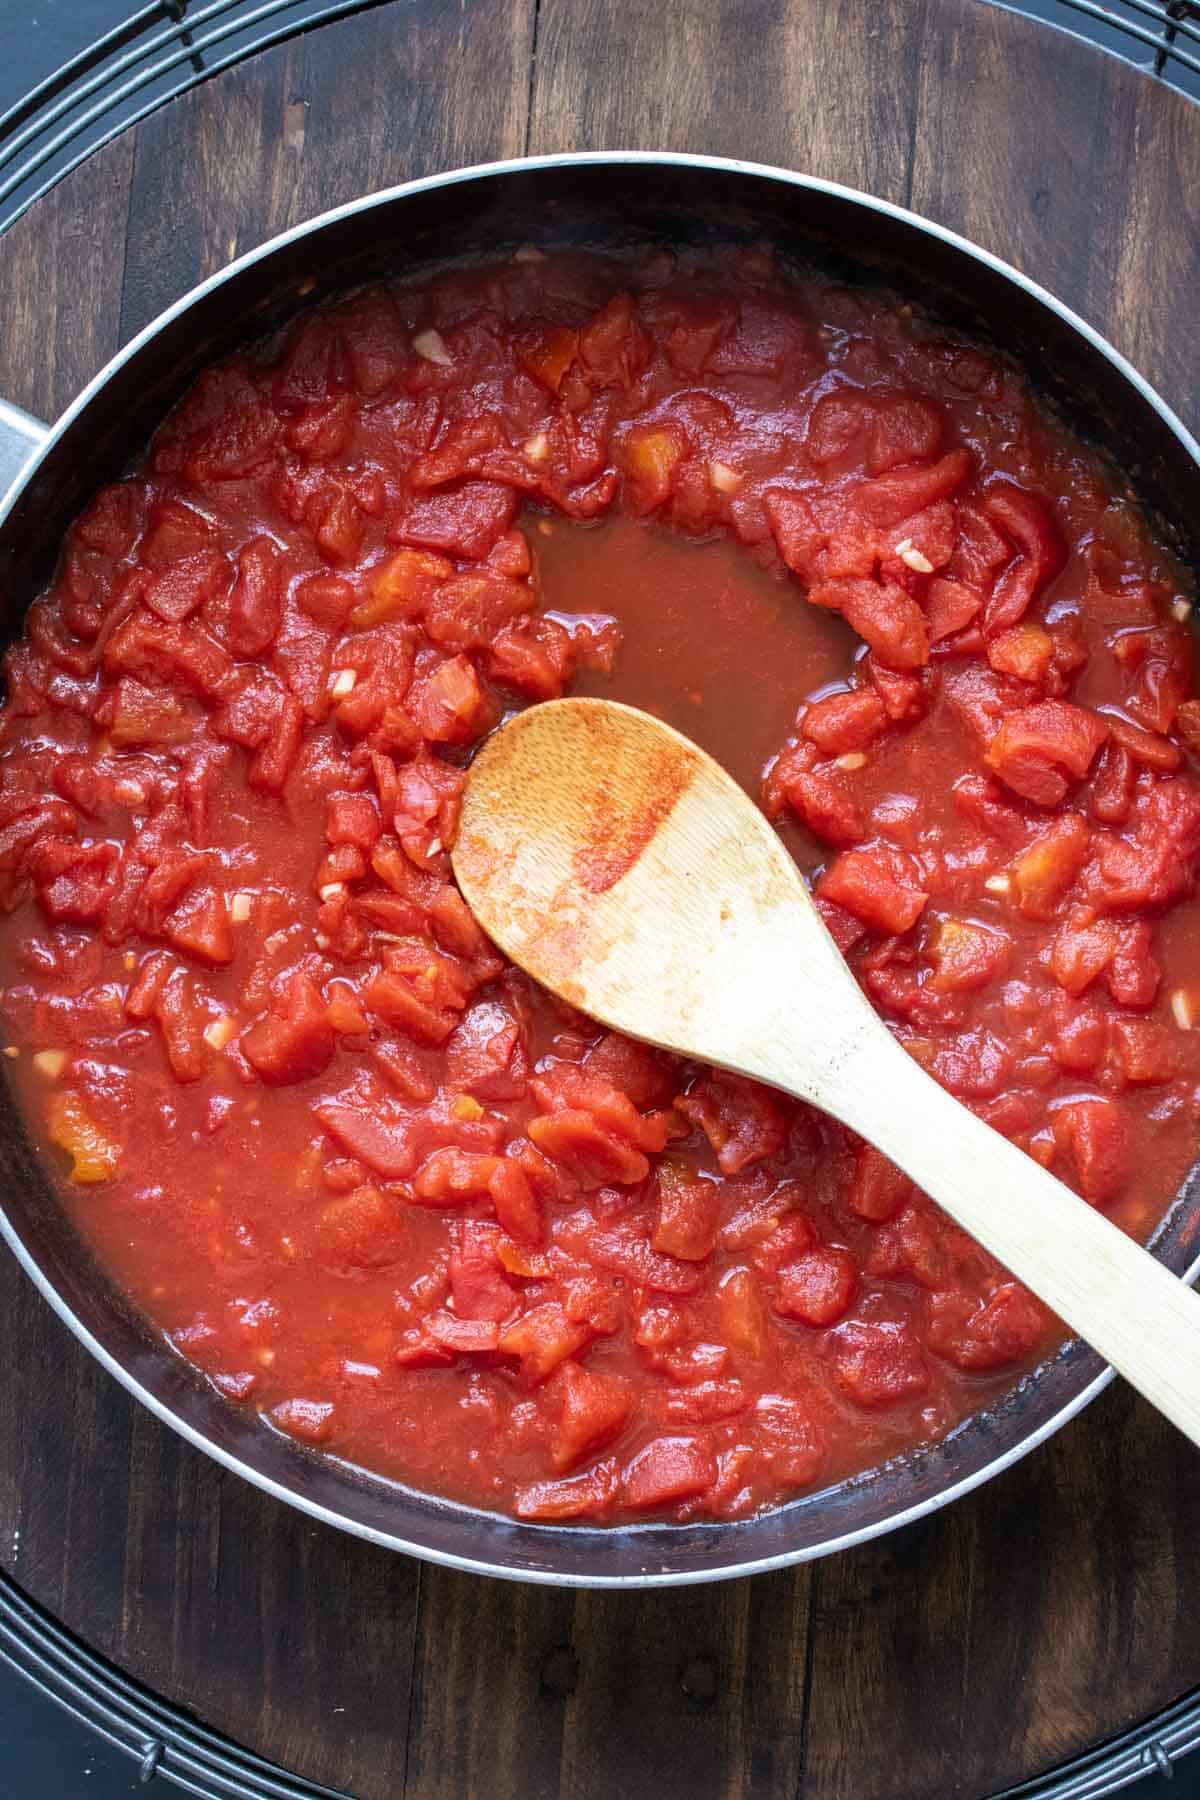 Wooden spoon mixing tomato sauce in a pan.